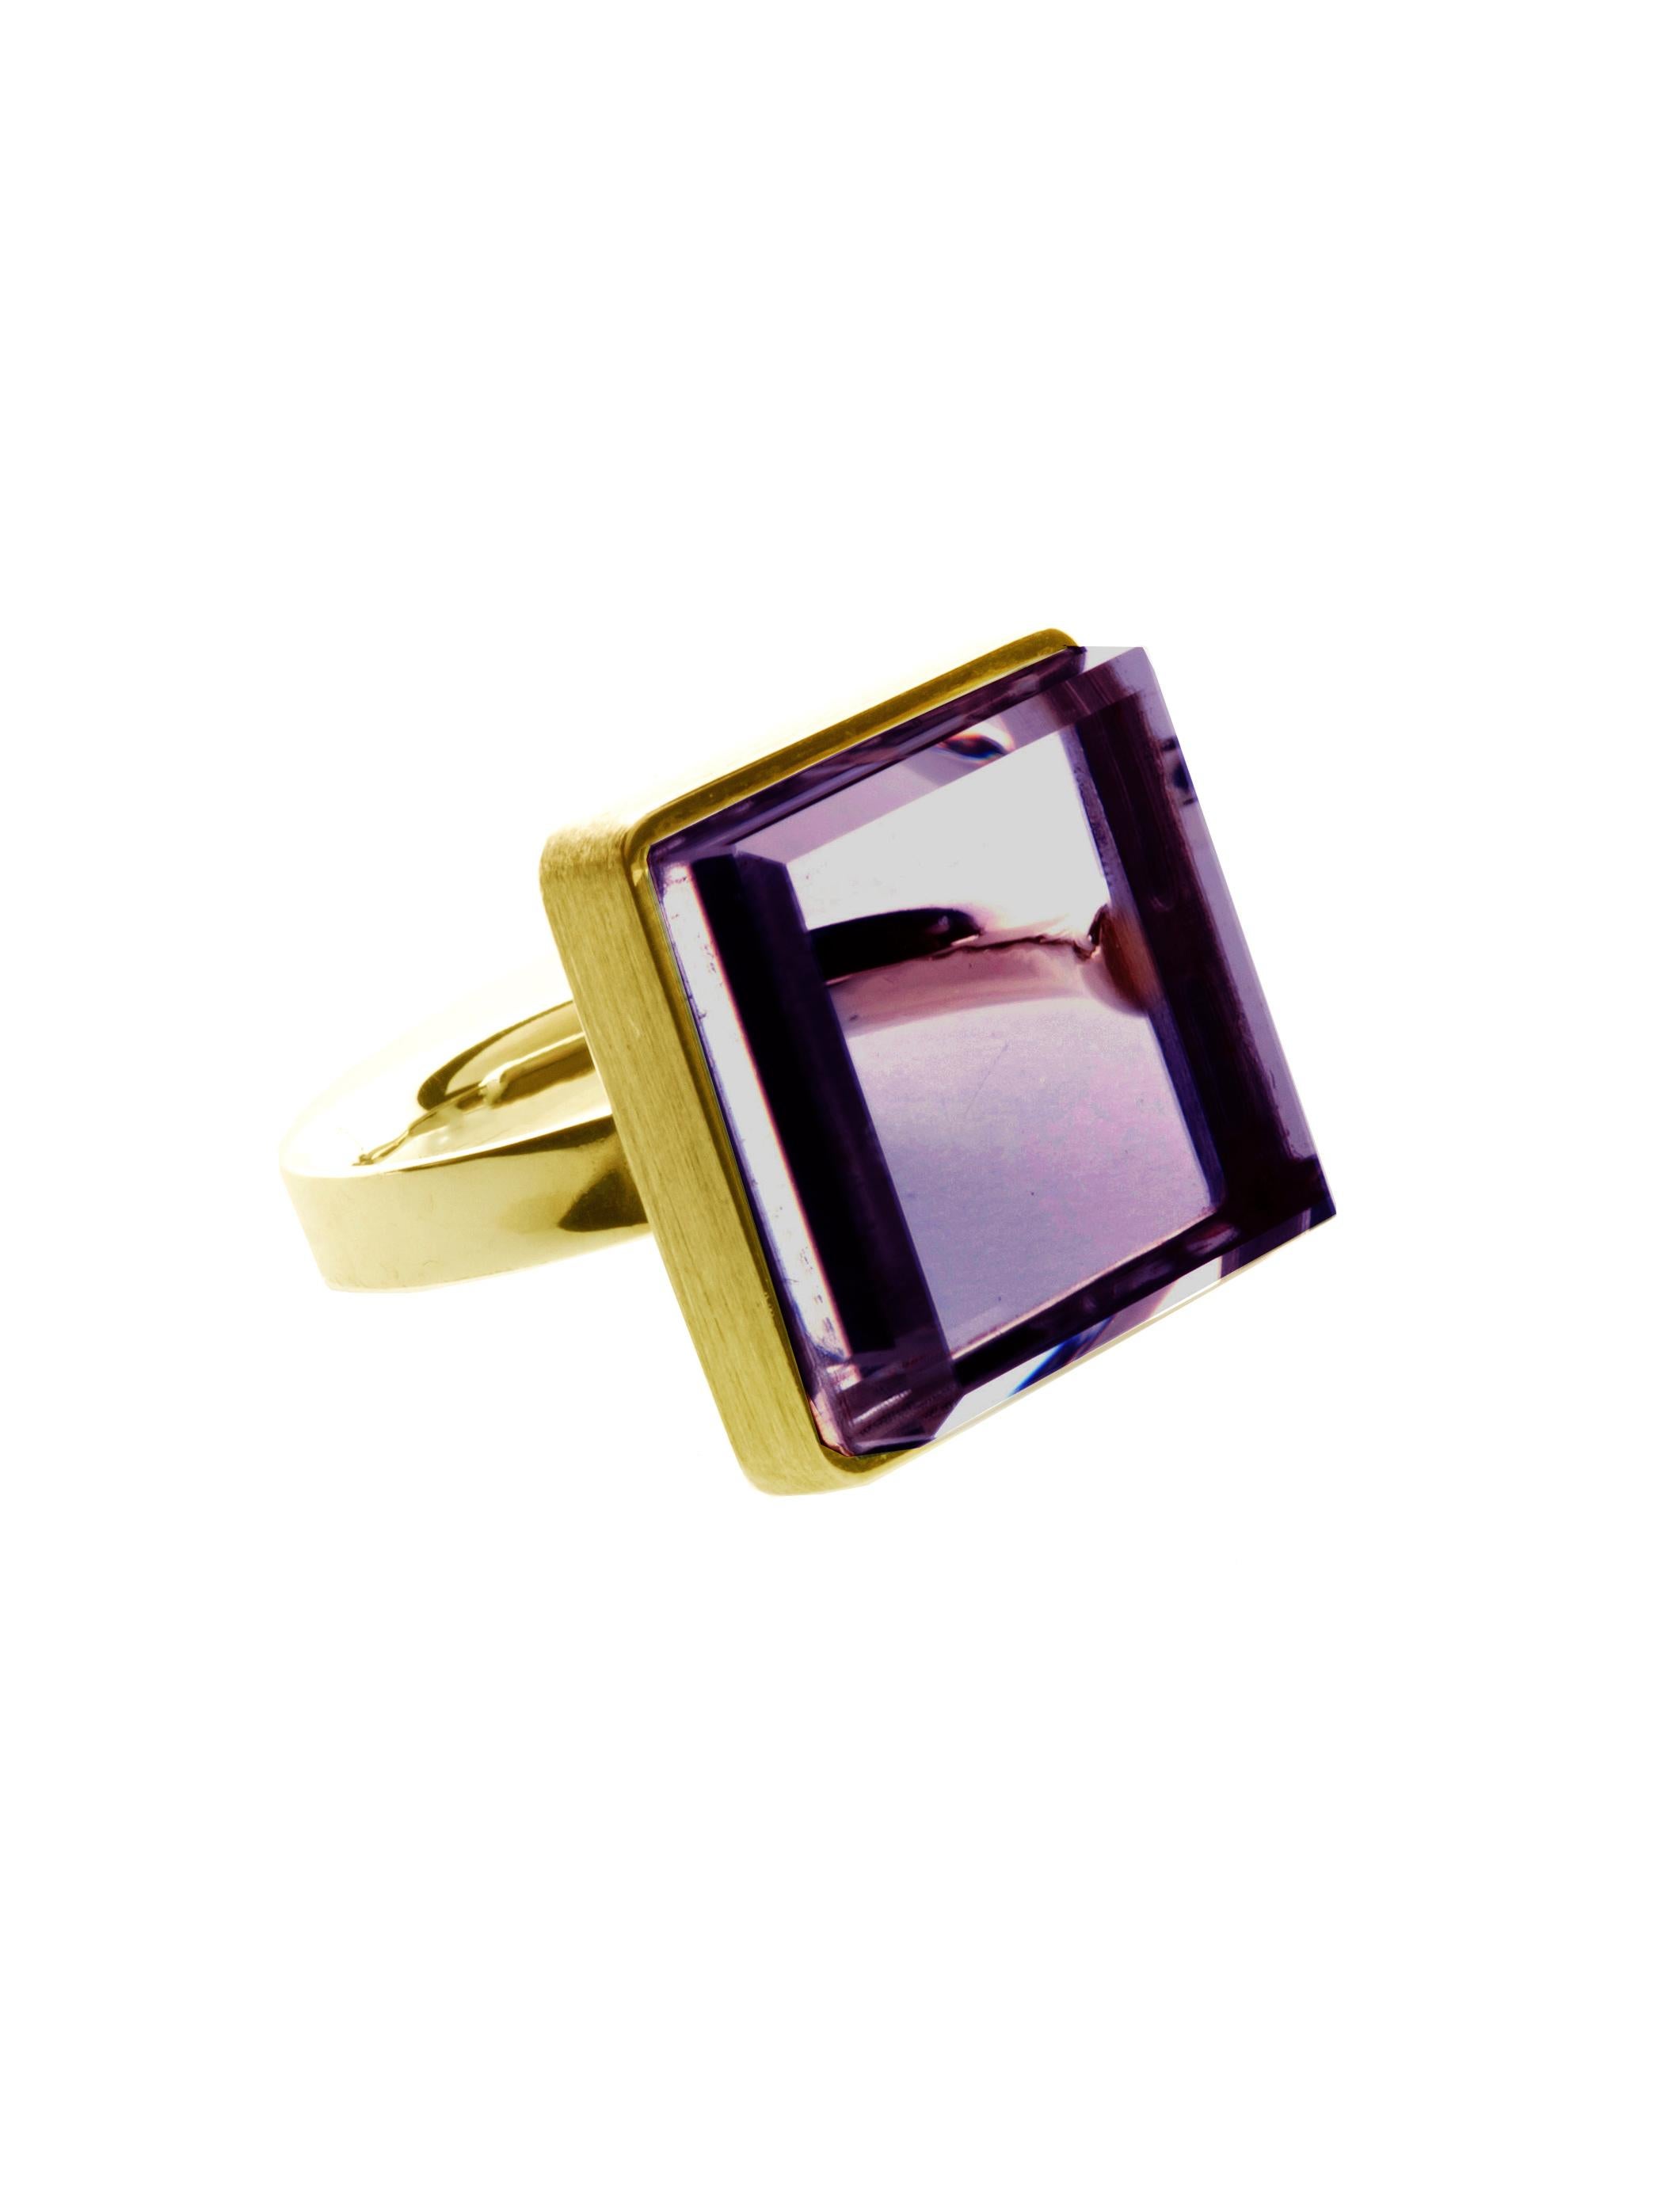 Rose Gold Art Deco Style Men's Ring with Amethyst Featured in Vogue For Sale 9